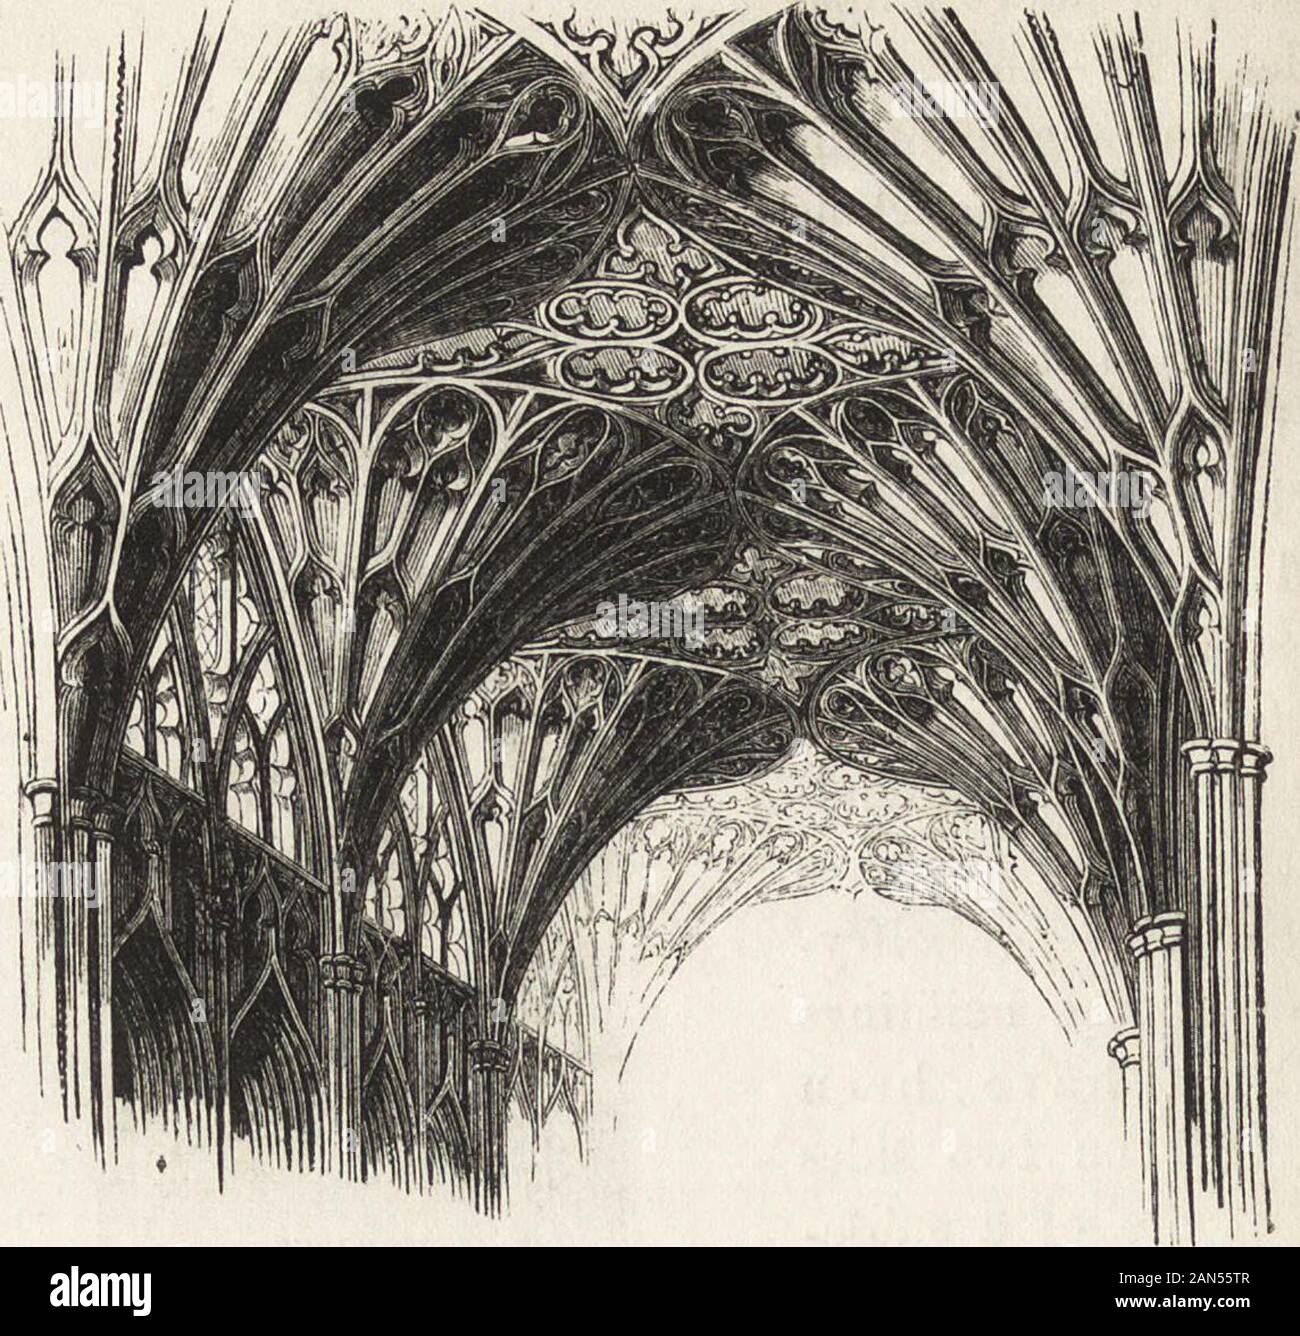 Gothic fan vaulting Stock Photos and Images | agefotostock